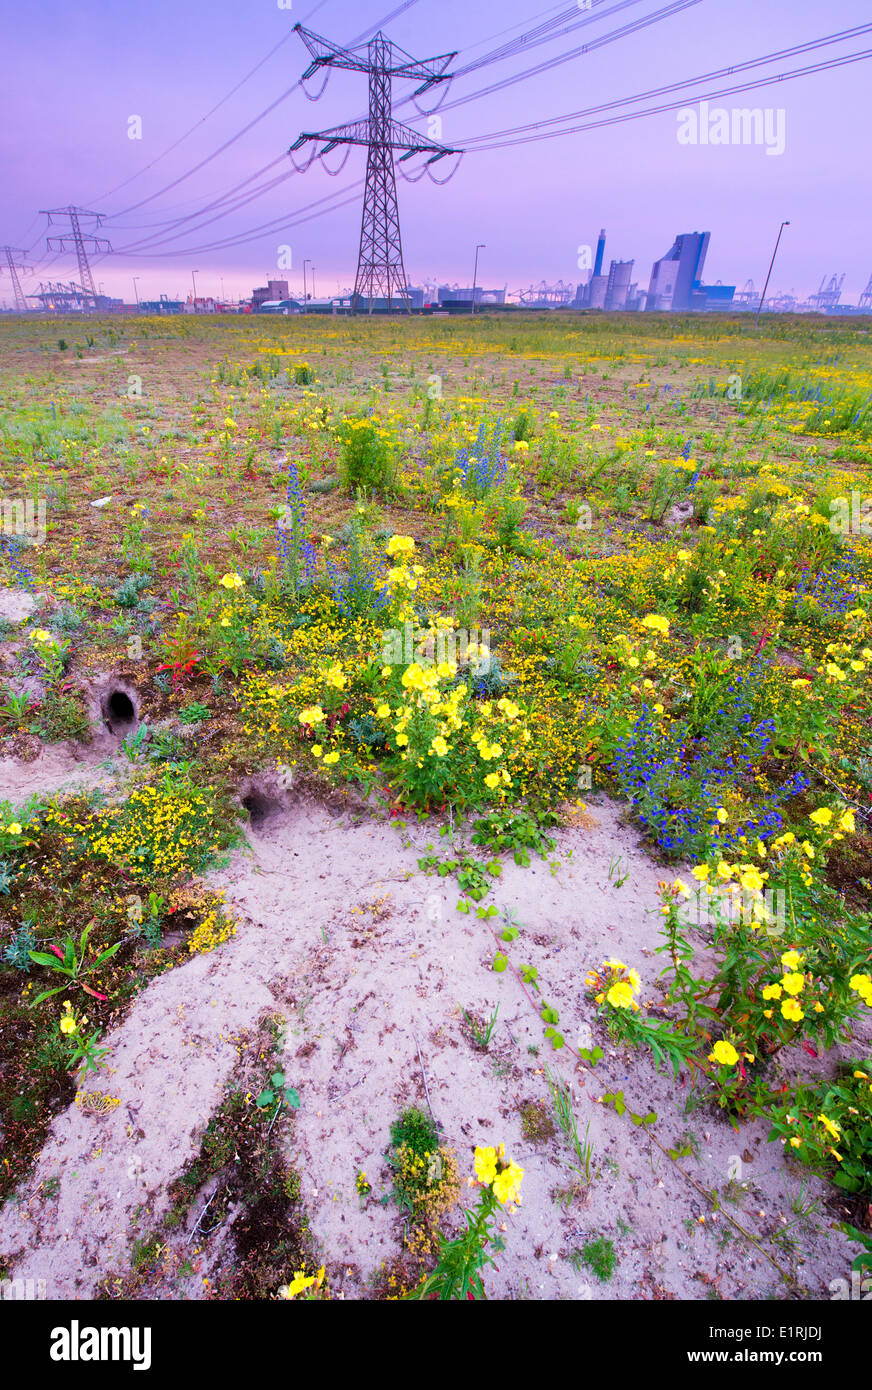 rabbit burrows in the port of Rotterdam with a field of  flowers on fallow land with industry on the horizon Stock Photo